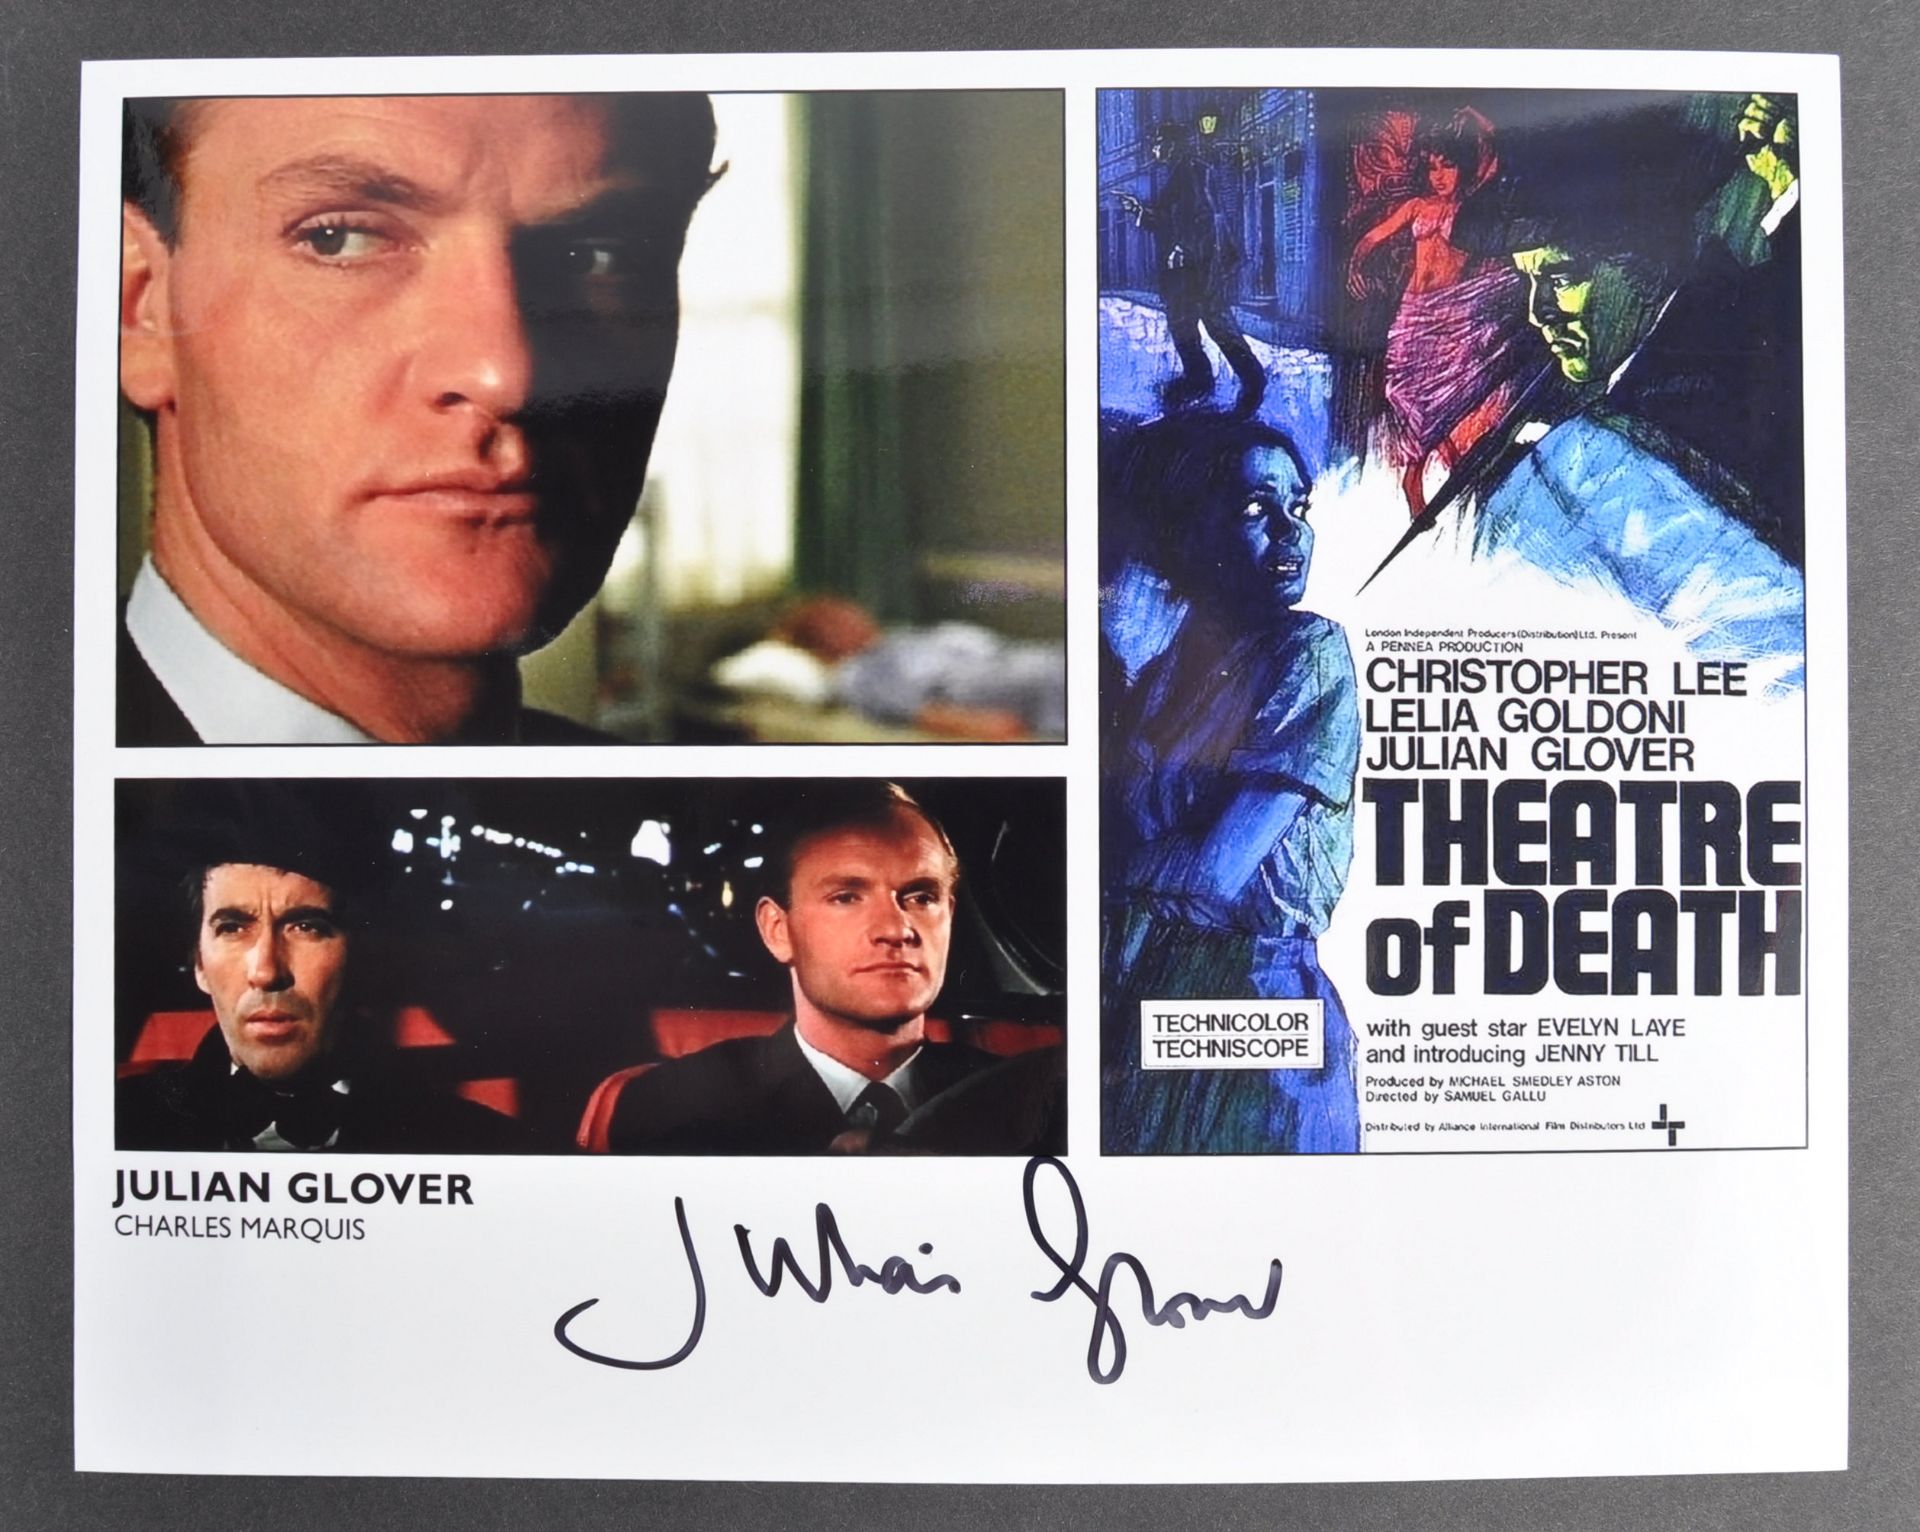 THEATRE OF DEATH (HORROR) - JULIAN GLOVER SIGNED PHOTOGRAPH